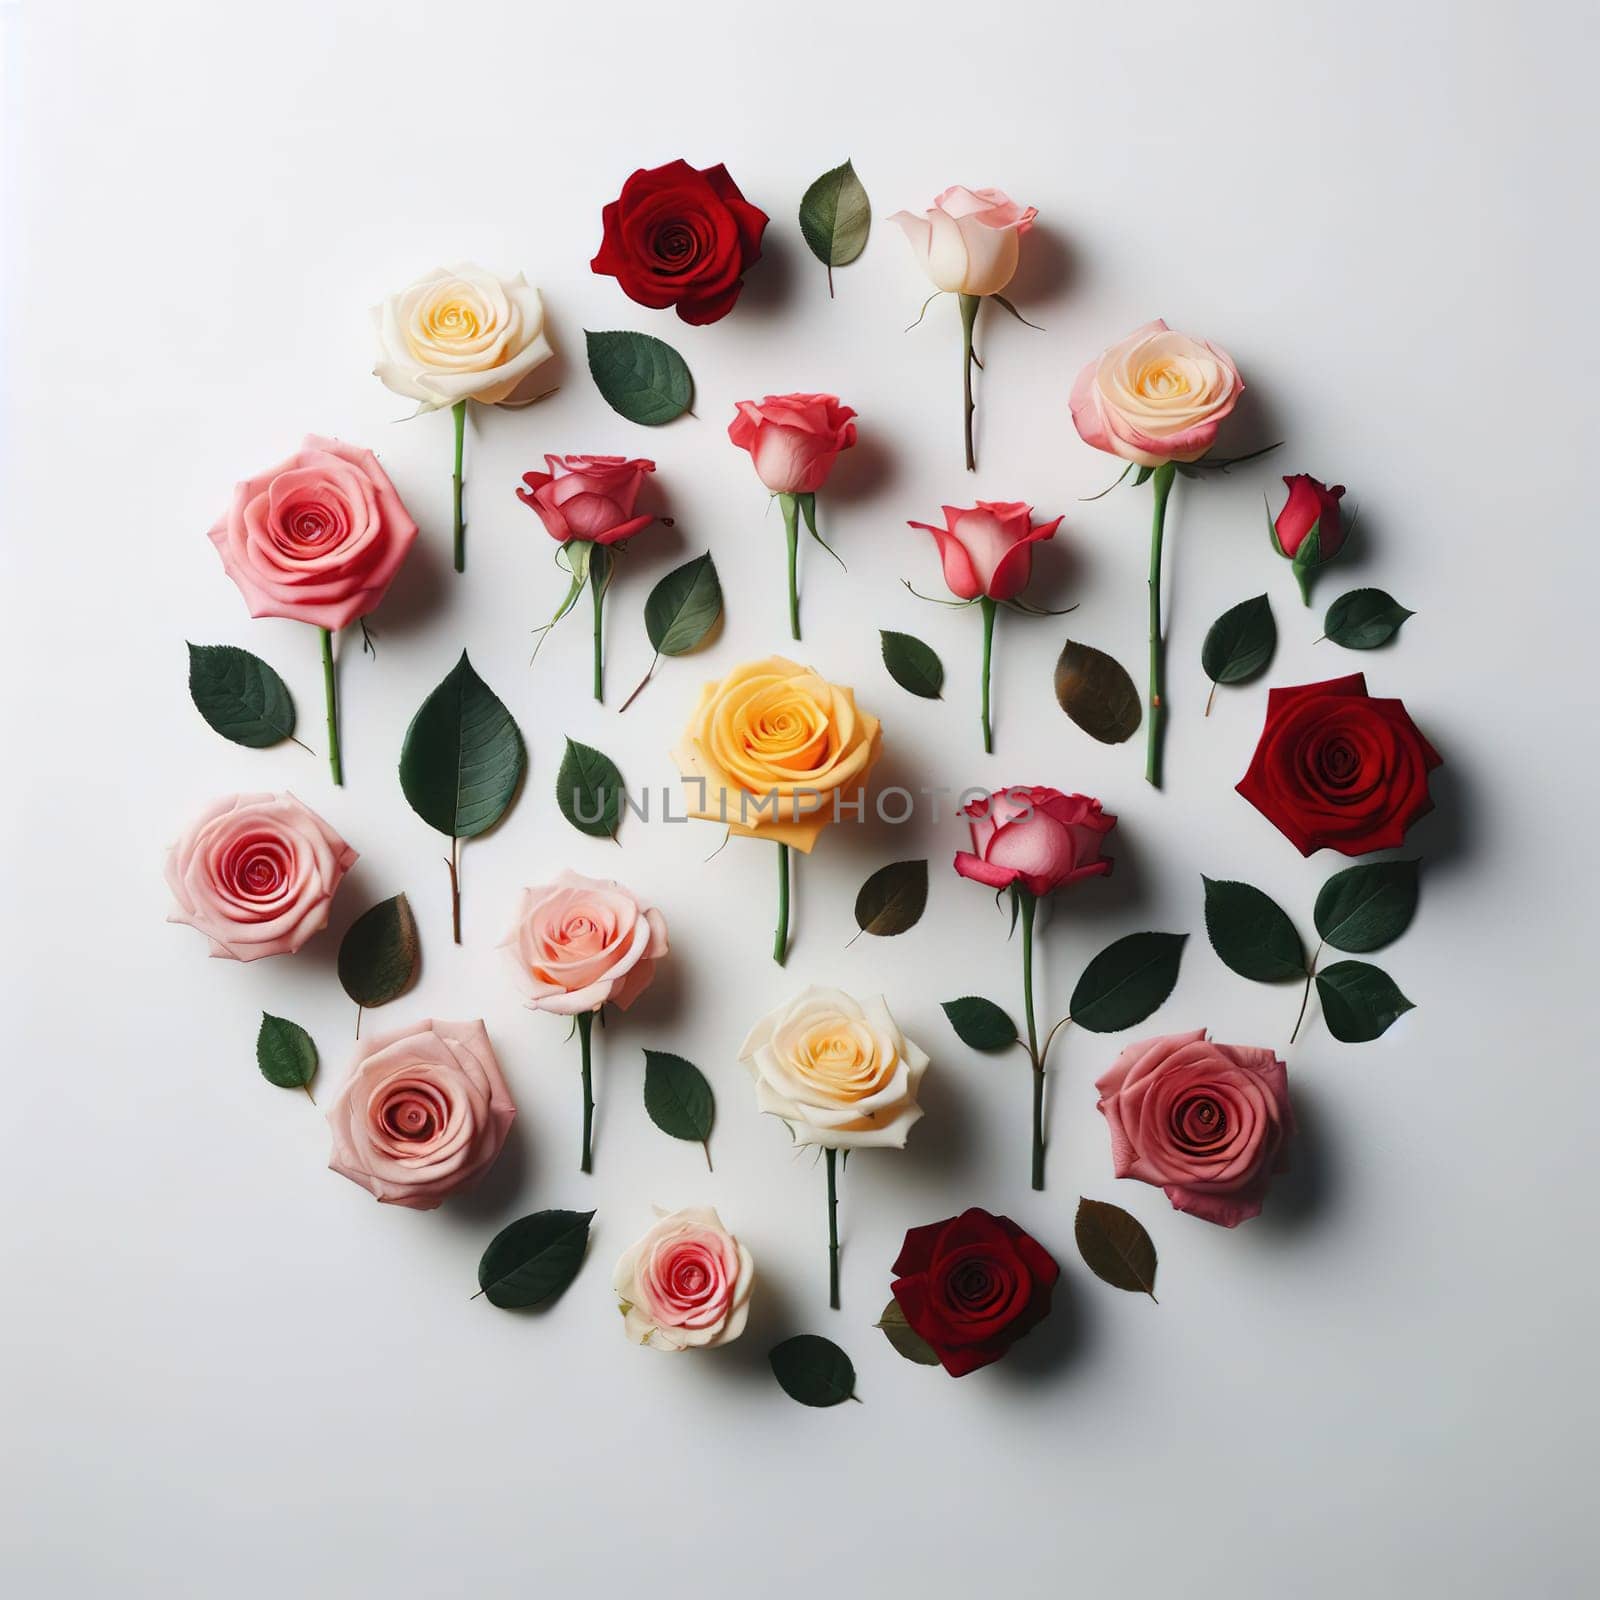 Composition of flowers in the form of a circle. High quality illustration